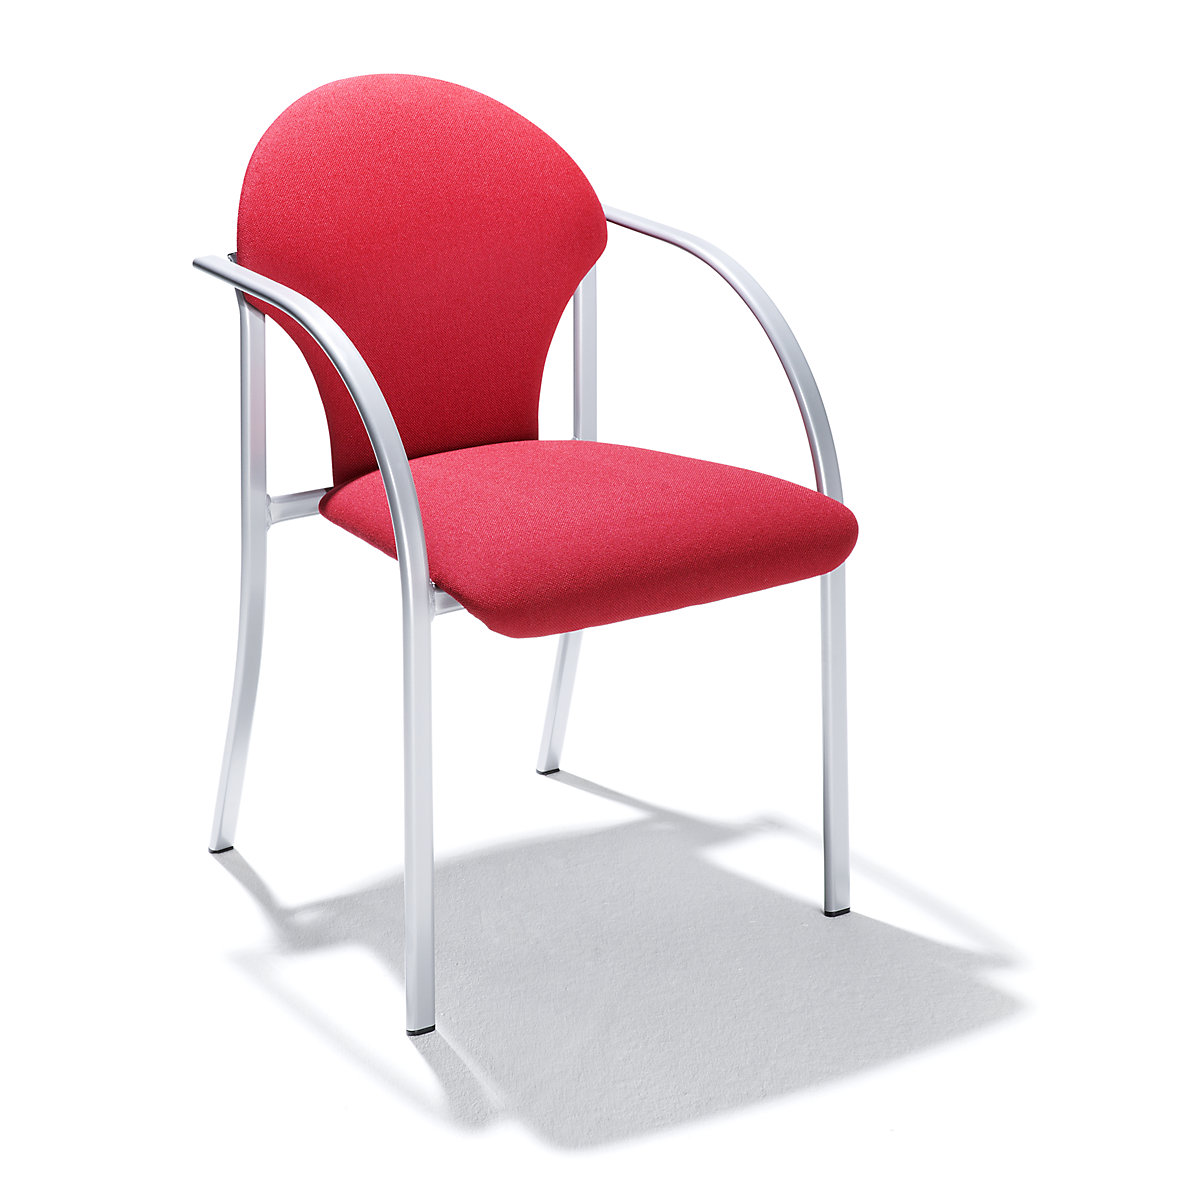 Padded stacking chair